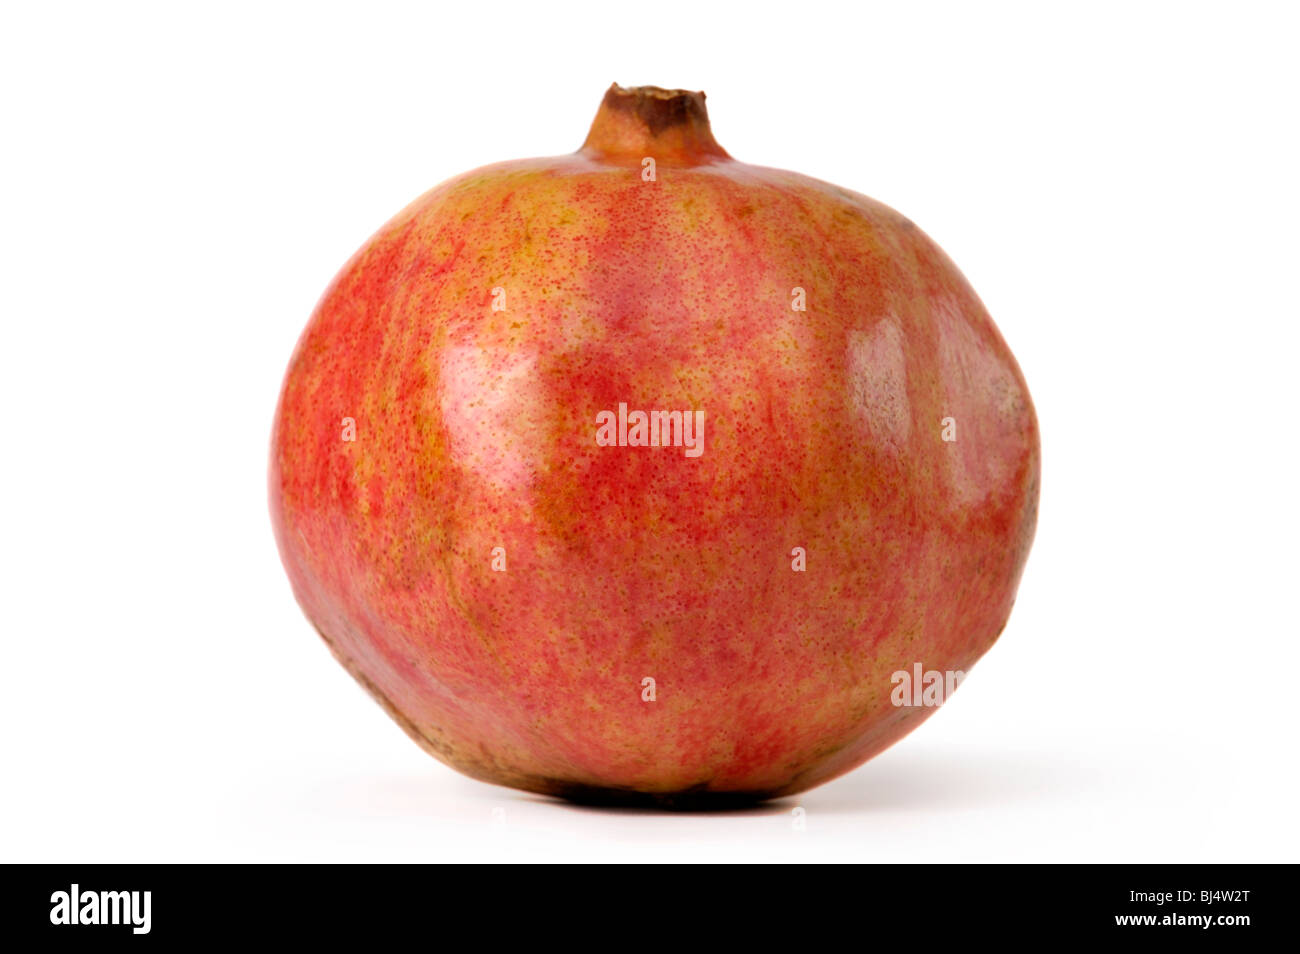 Big red appetizing Iranian pomegranate close-up isolated silhouette on white background Stock Photo